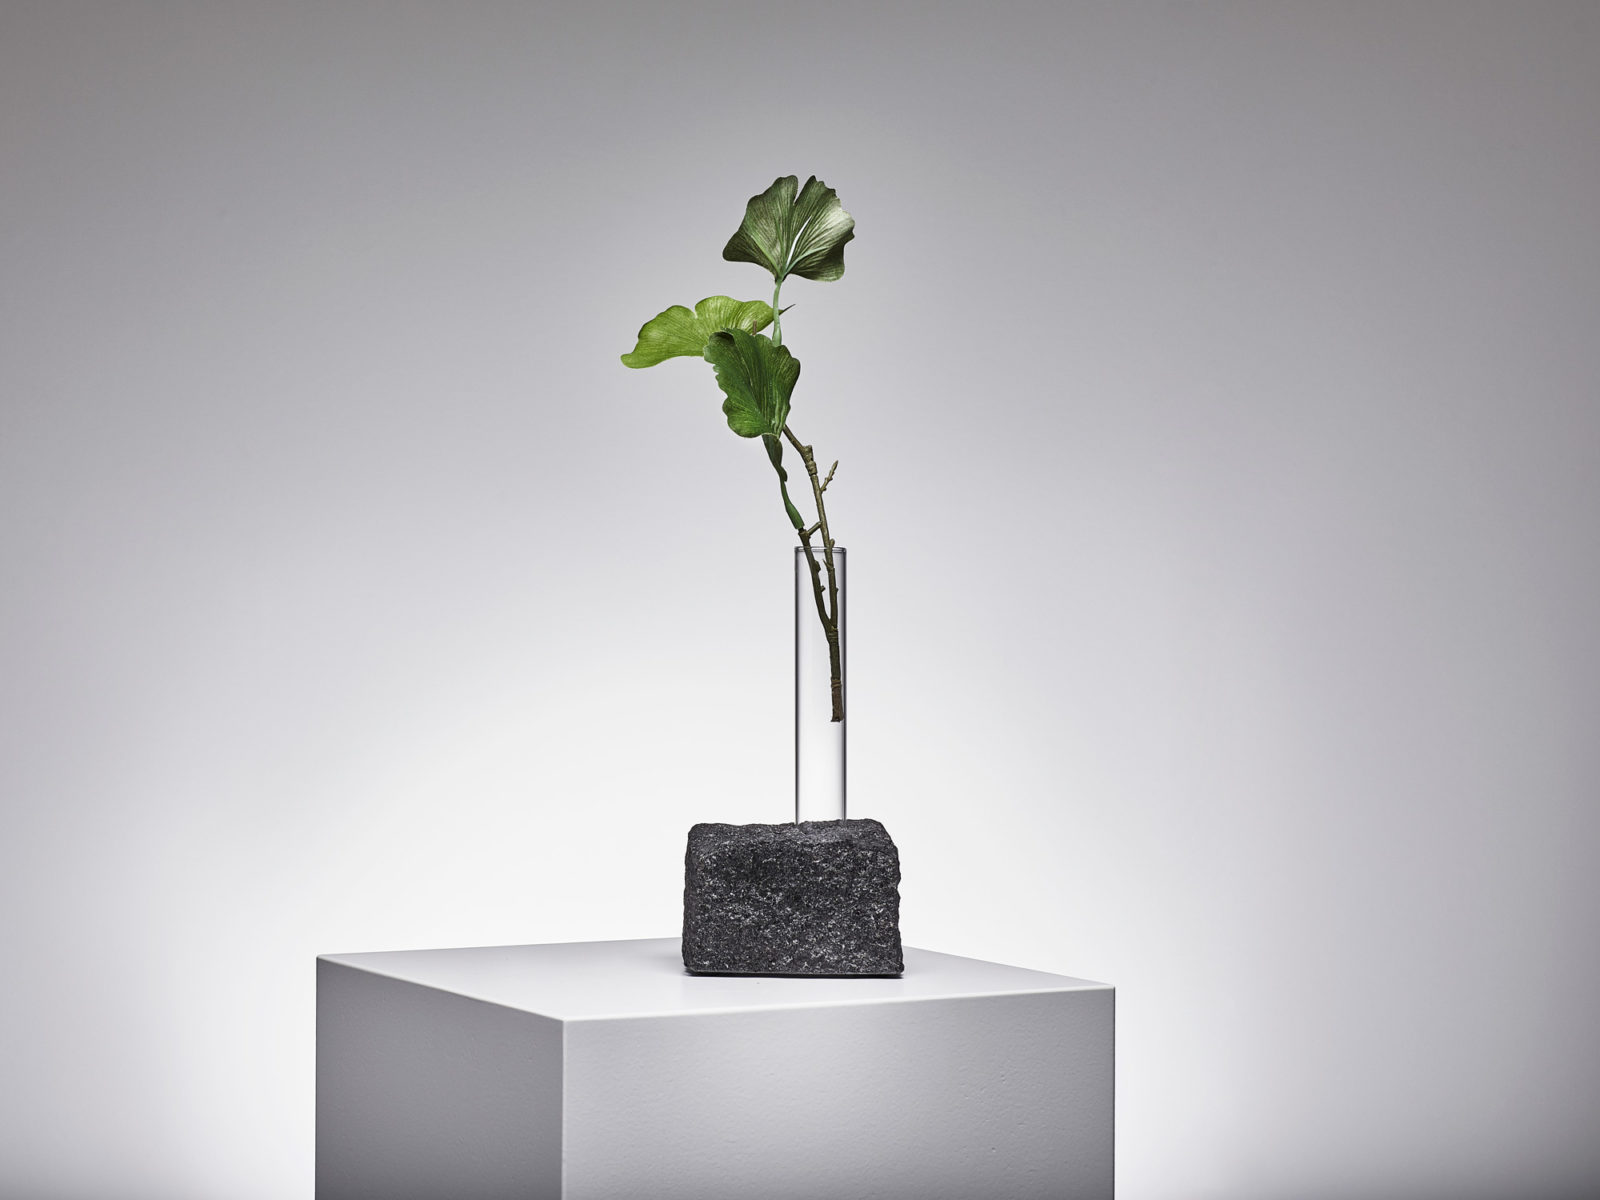 A green plant in a glass vase attached to a black stone block.